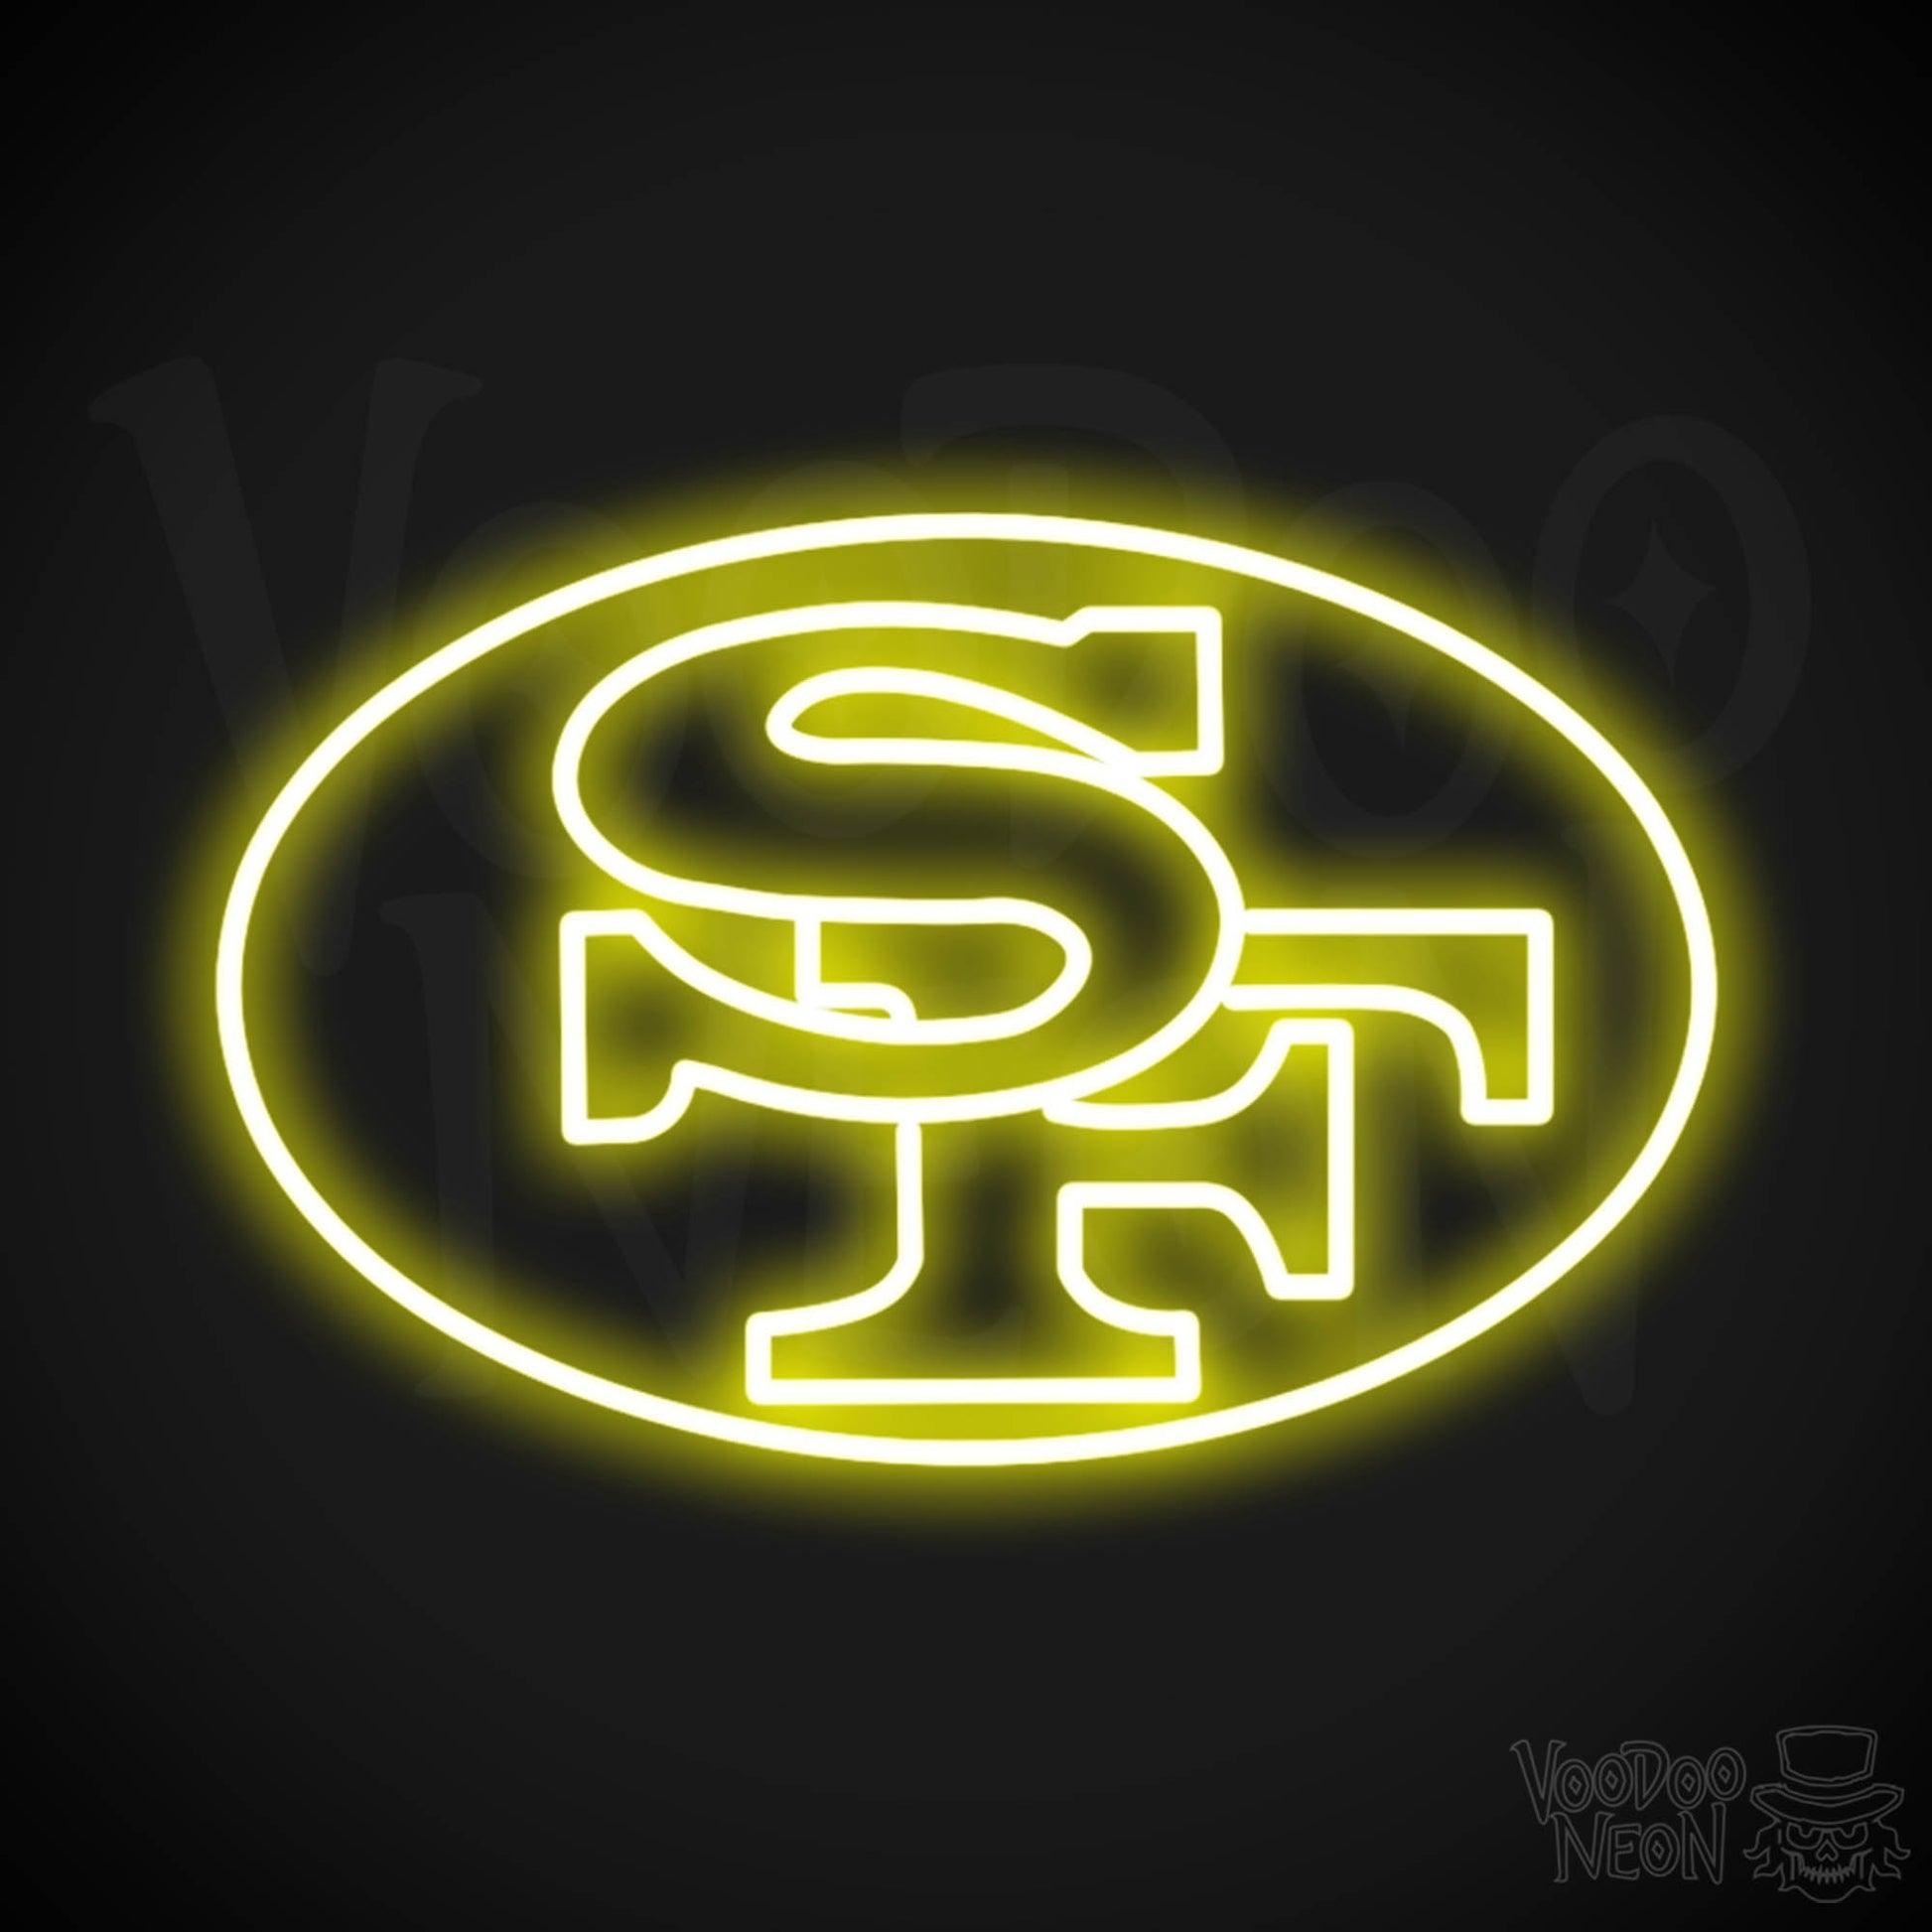 49ers Logo Wallpapers - Top 20 Best 49ers Logo Wallpapers [ HQ ]